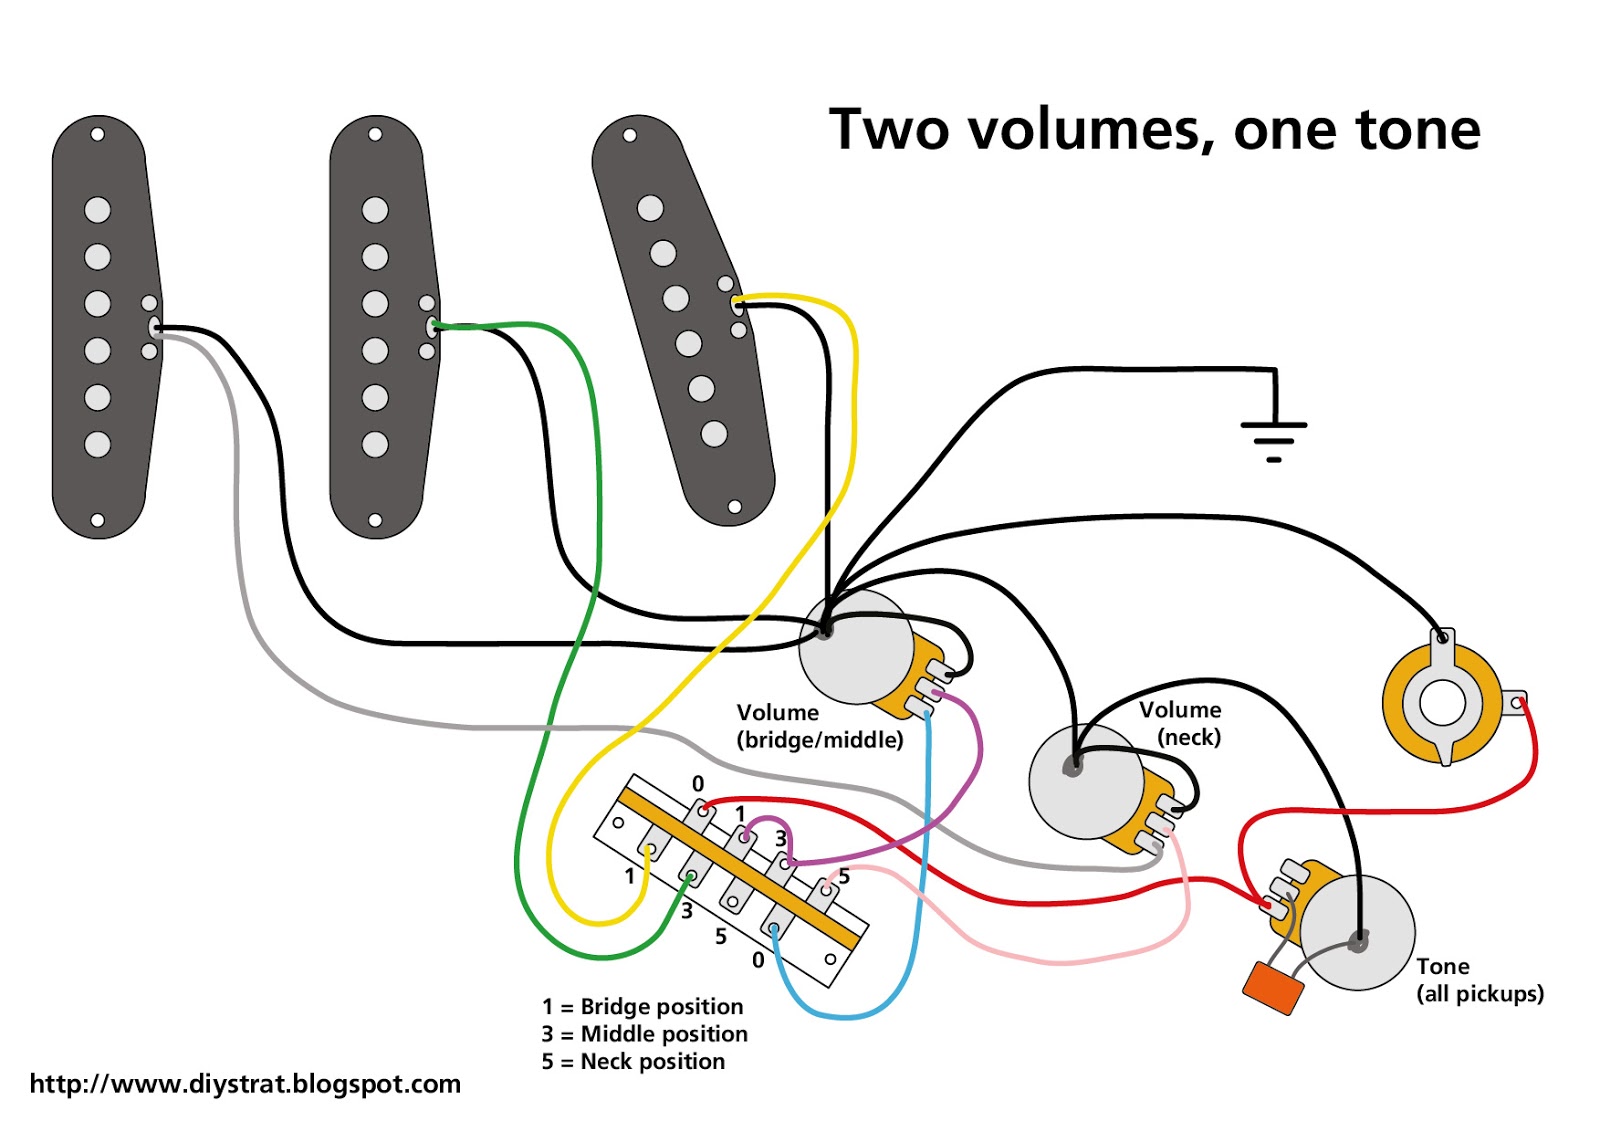 Wiring Diagram For 2 Humbucker Guitar With 3 Way Switch 2 Volume And 2 Tone Pots from 4.bp.blogspot.com